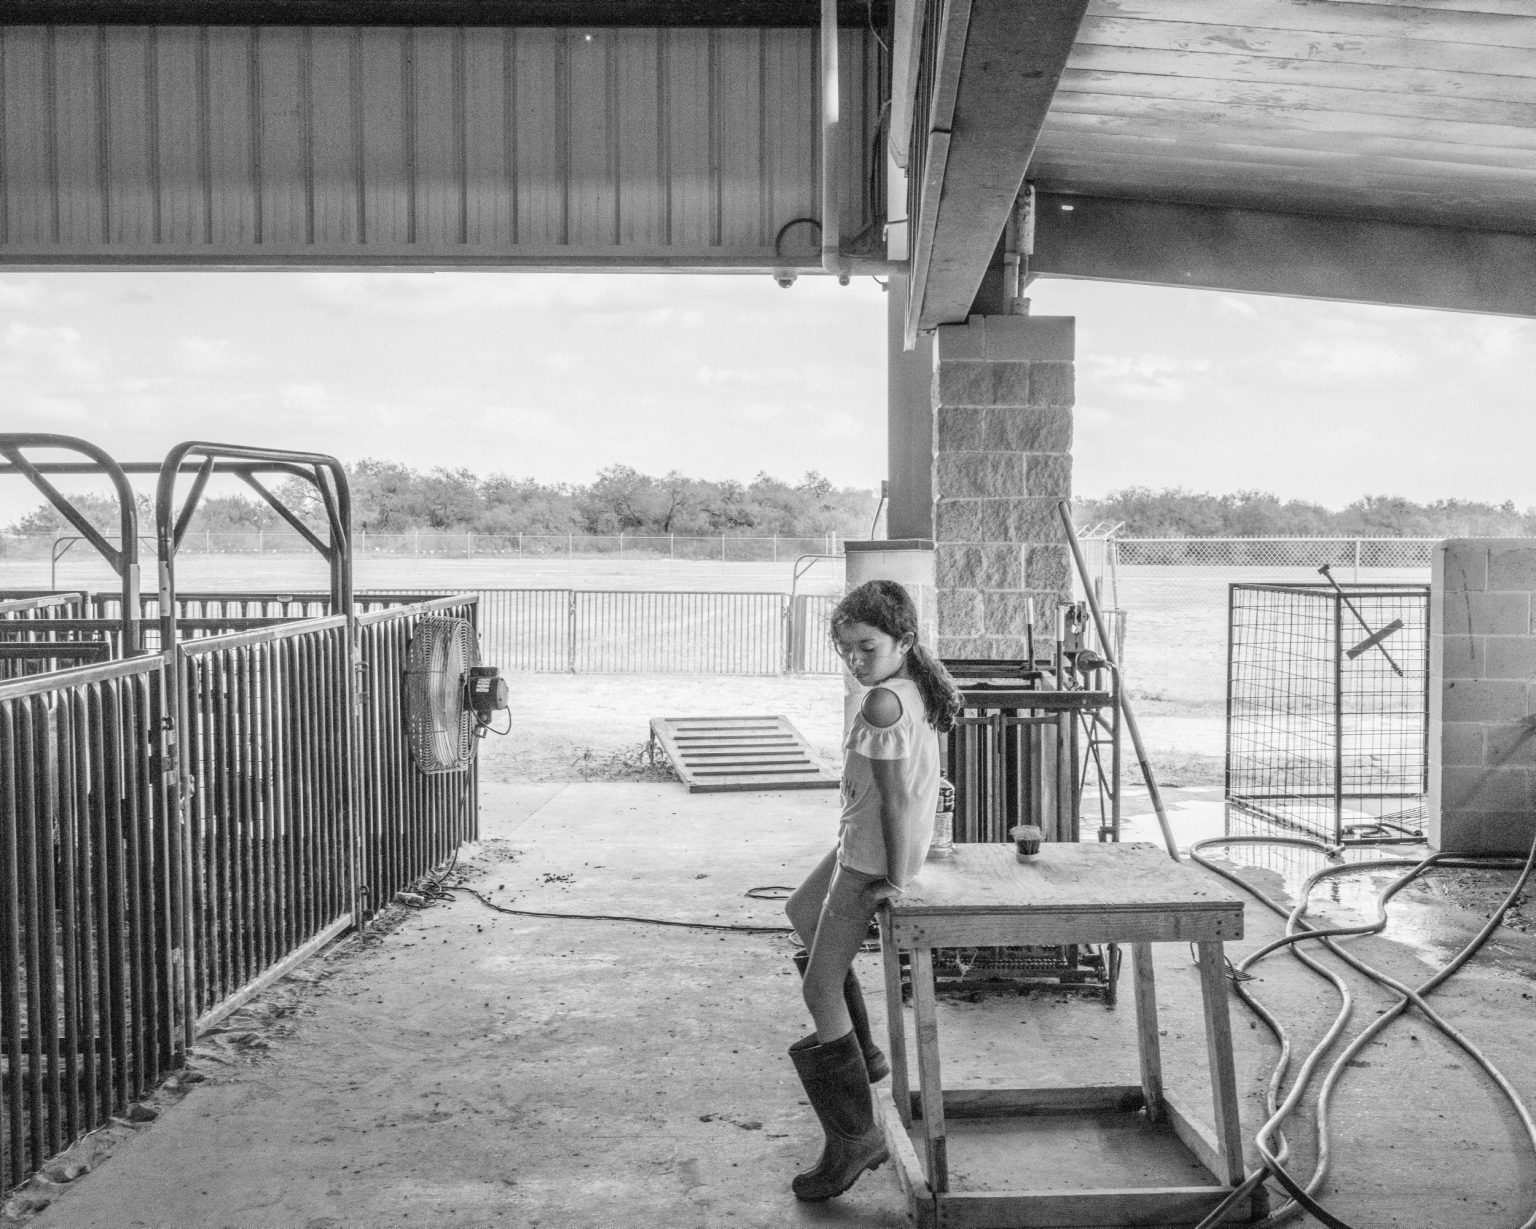 Leilani, 9yrs old, in the barns ran by her mother. La Joya, Texas. October 2019.